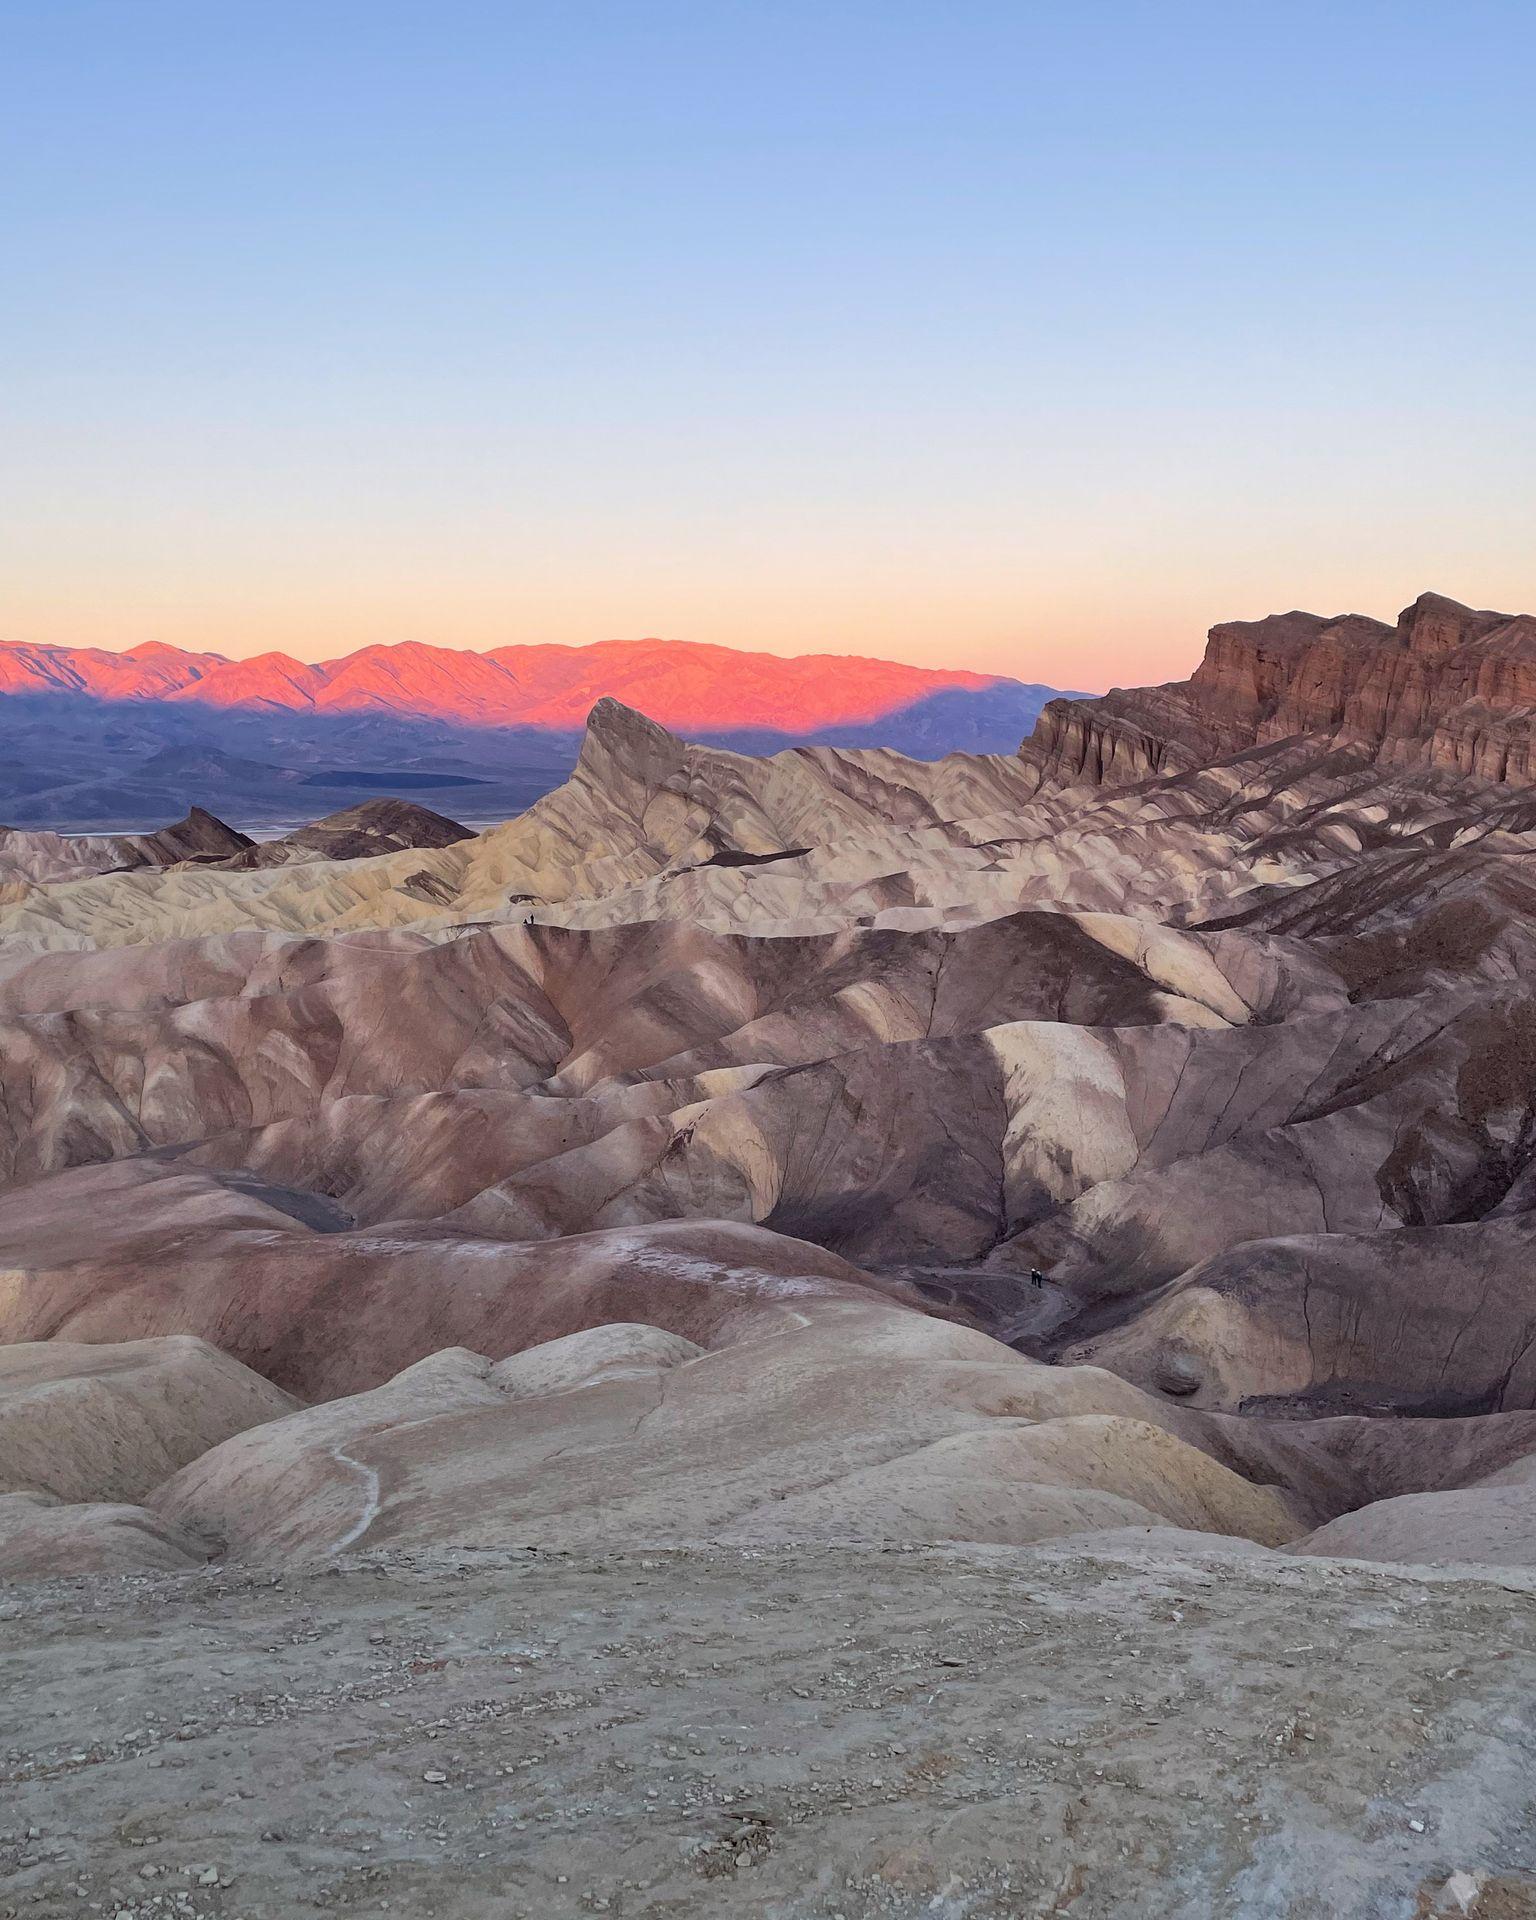 A scene with badlands that look to be striped in various shades of brown. The mountains in the distance glow pink and blue from the rising sun.